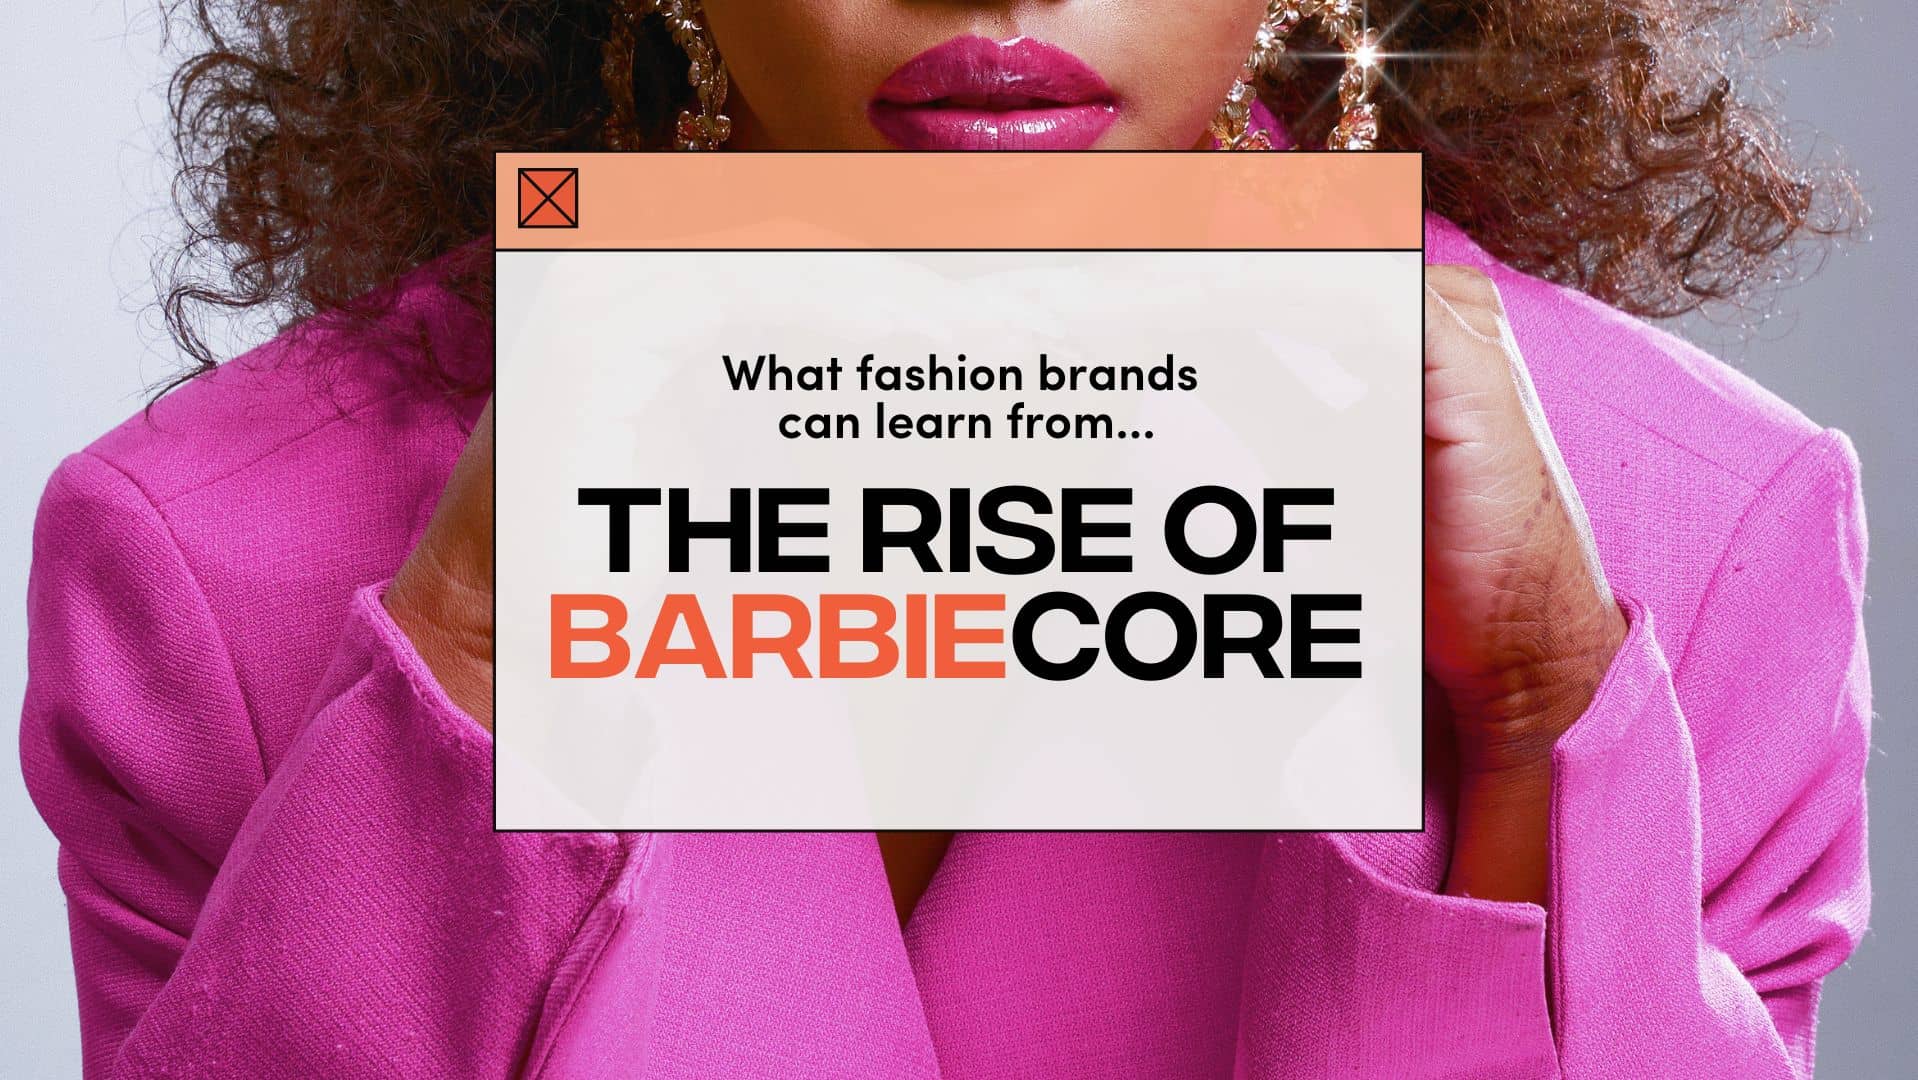 Barbiecore: What Fashion Brands Can Learn from TikTok's Barbie Trend